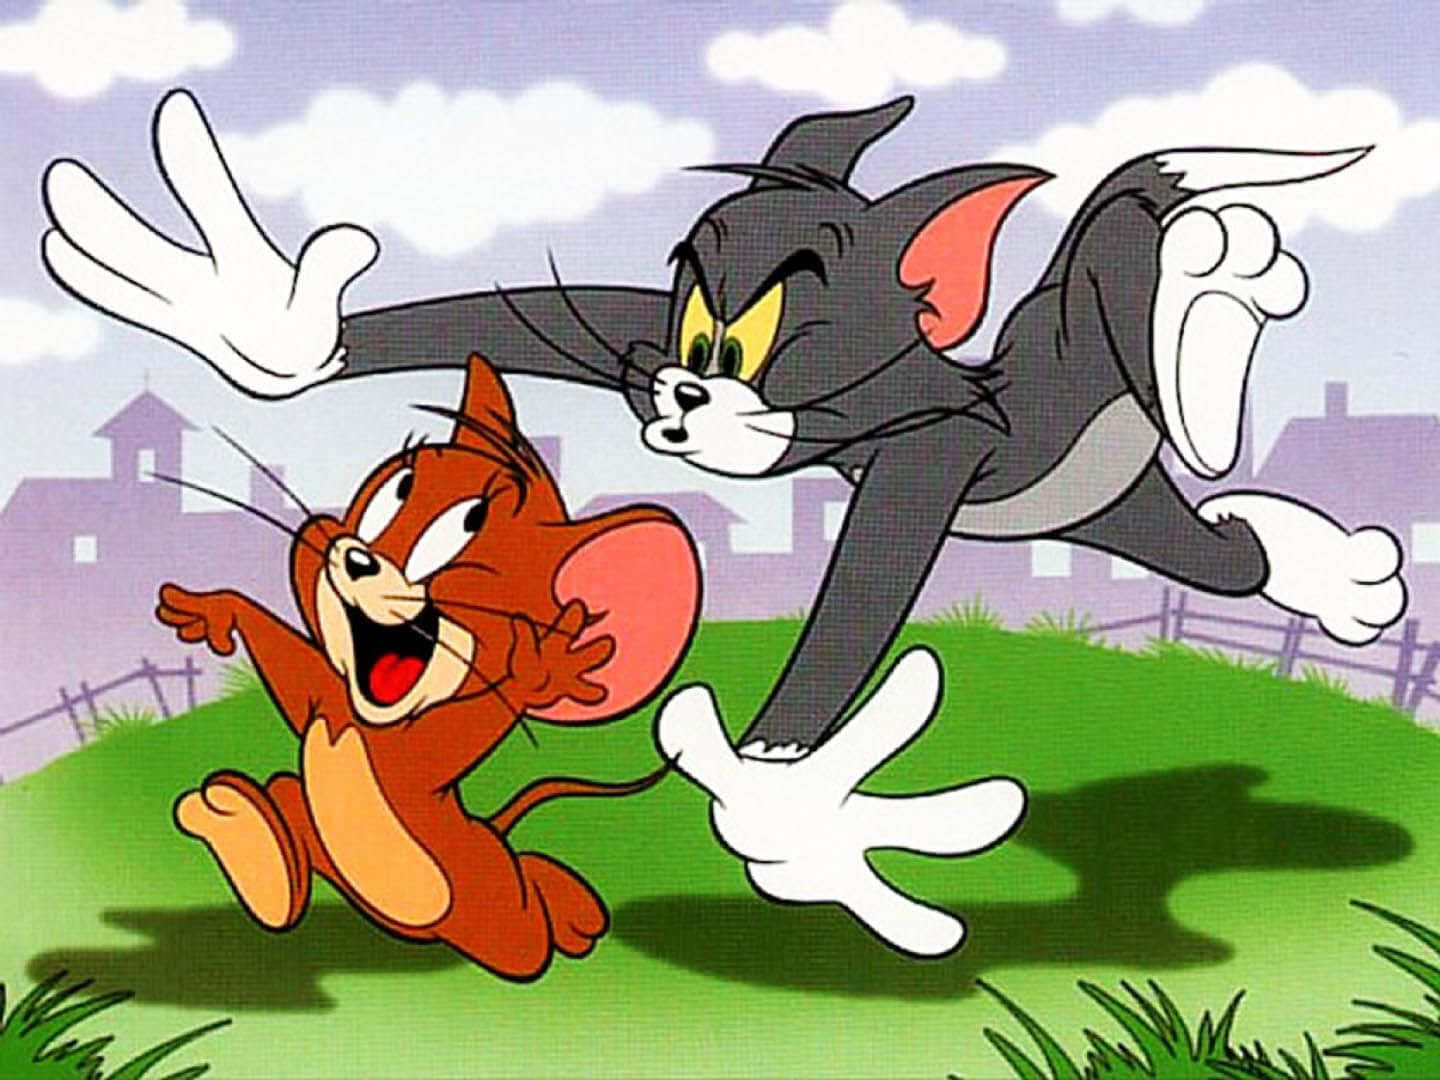 Tom and Jerry get into a classic slapstick funny fight. Wallpaper